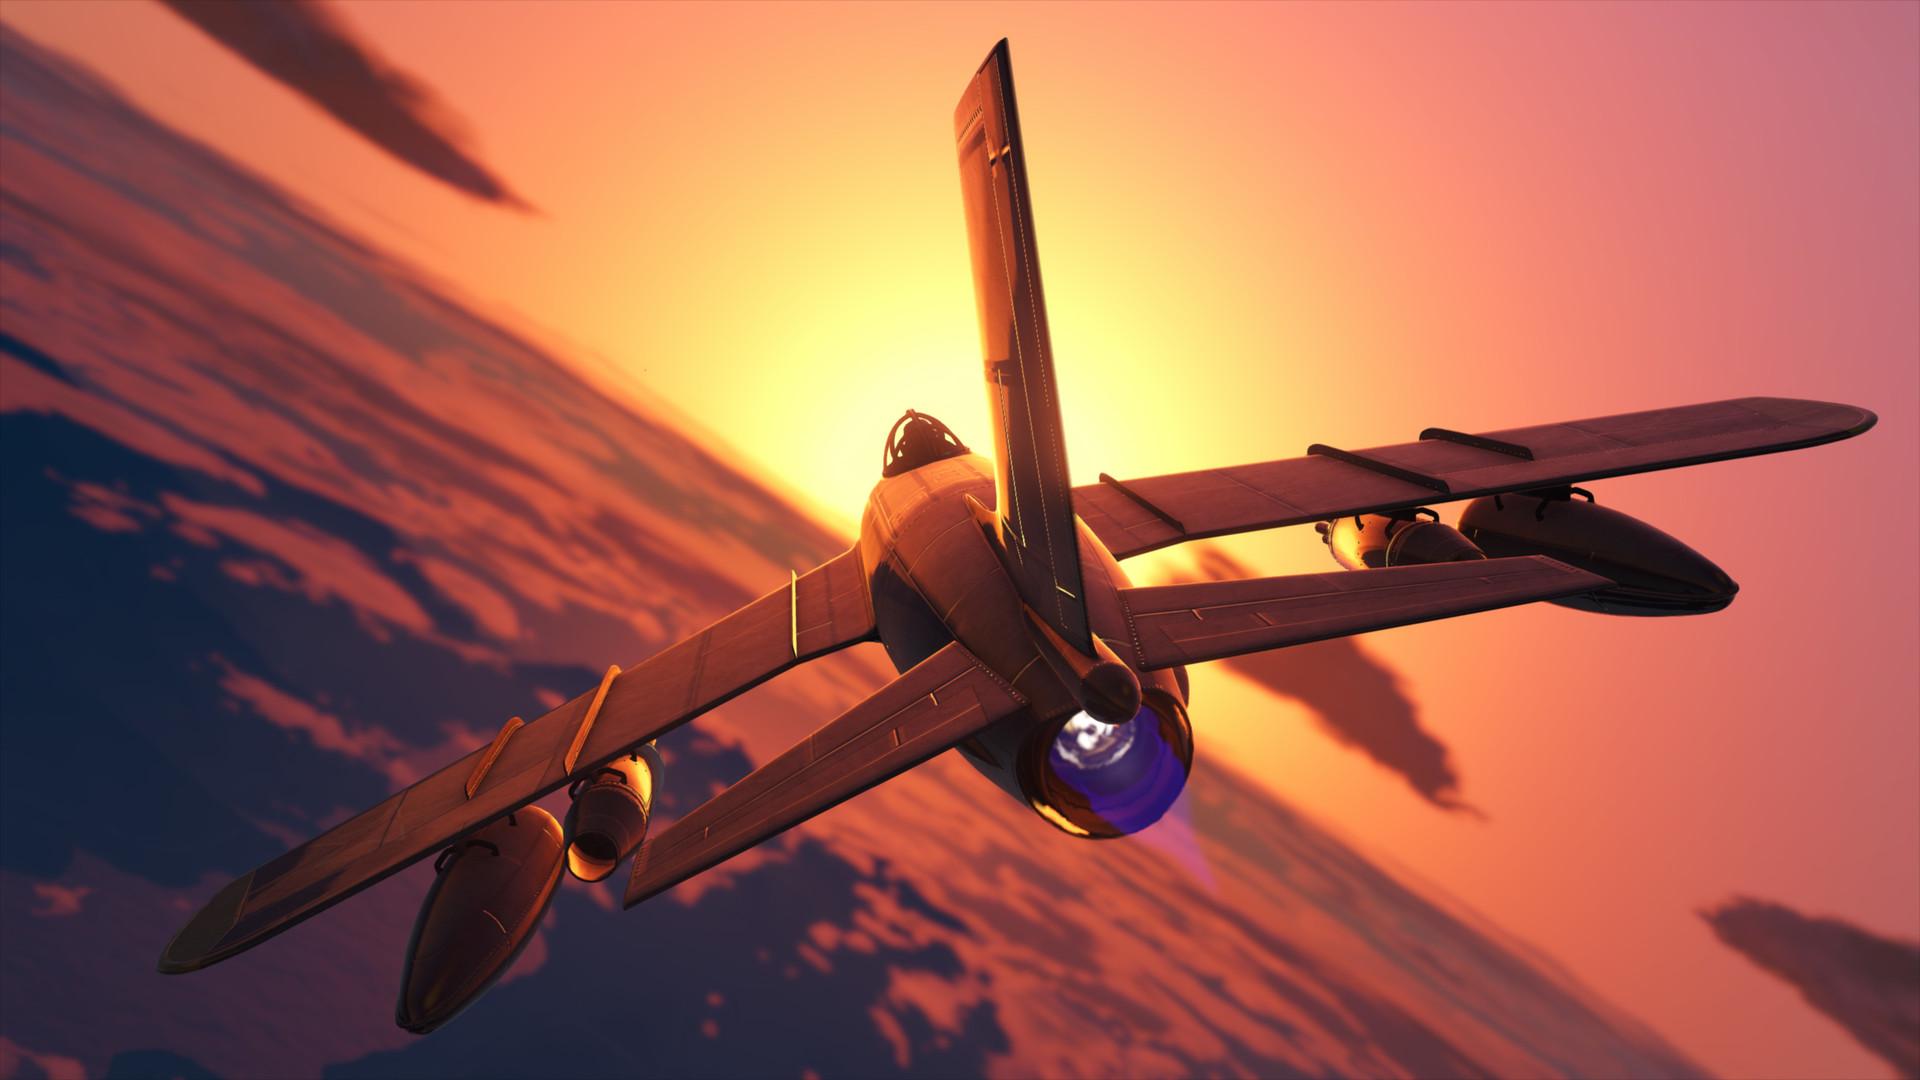 Screenshot №23 from game Grand Theft Auto V